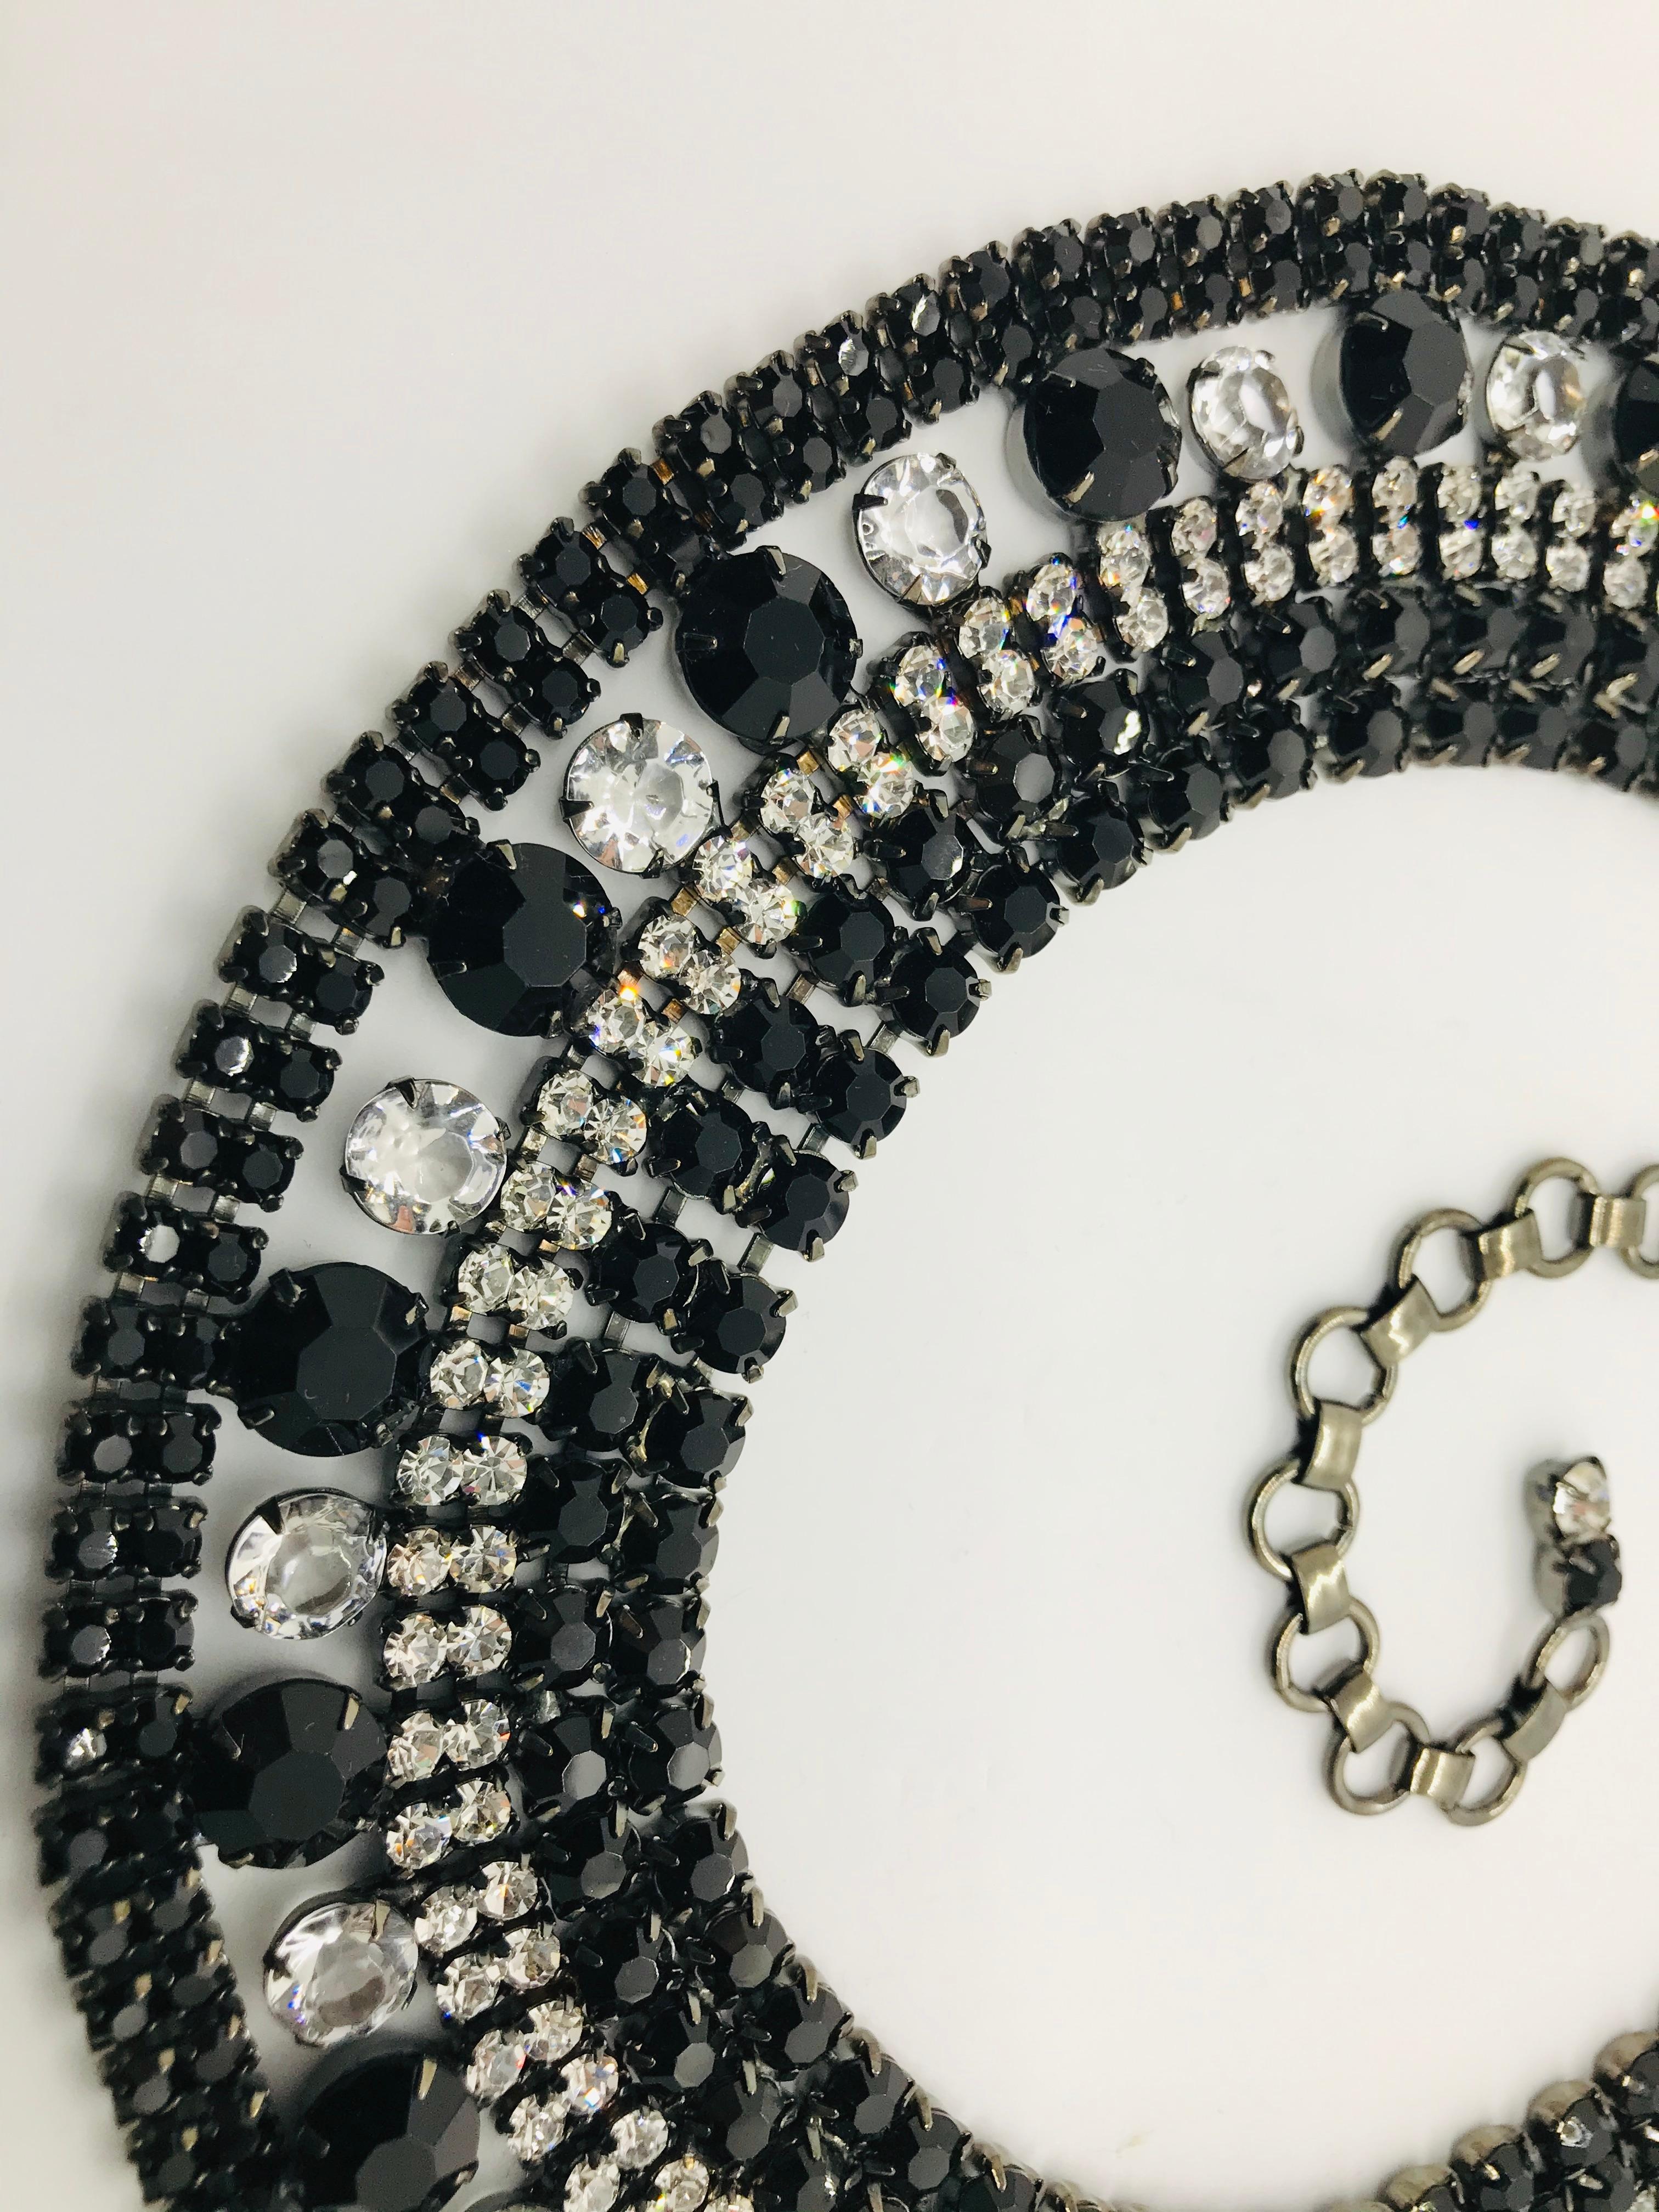 This black jet and clear Austrian crystal cleopatra collar necklace is a petite version of some of our larger cleopatra collar necklaces.  It is great for someone who may not be comfortable with larger necklaces.  It is an art deco inspired design